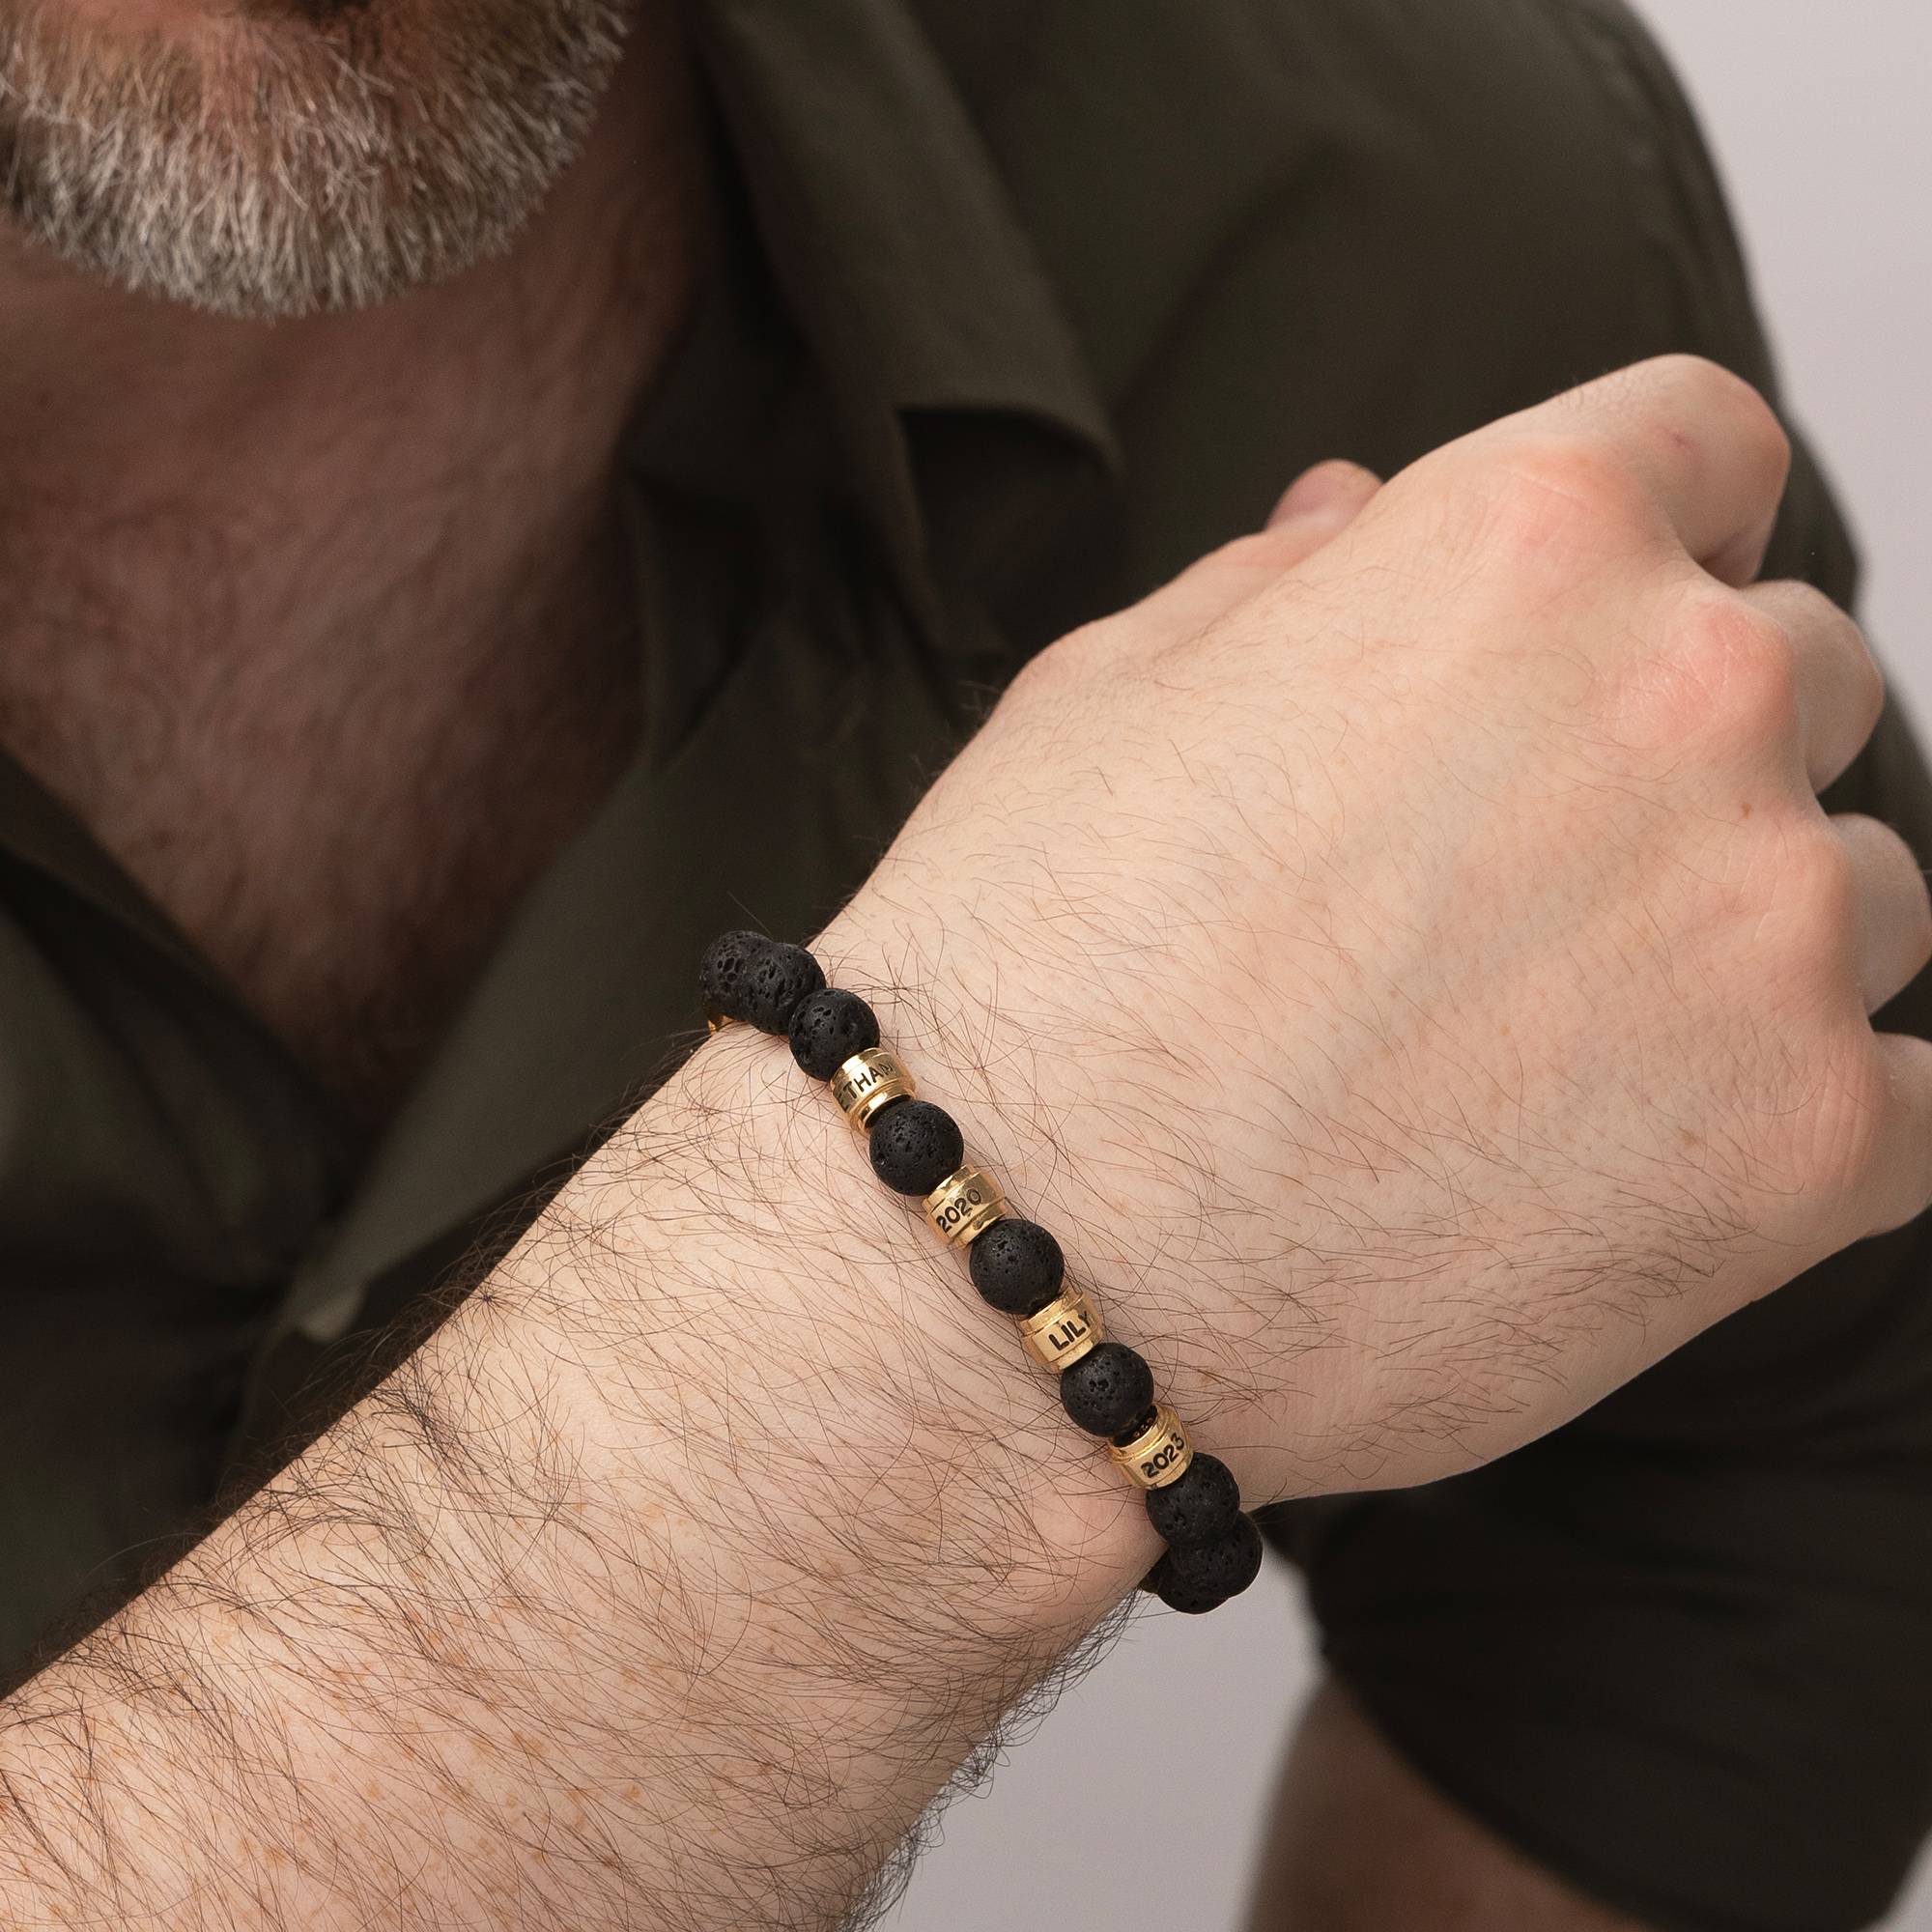 Jack Lava and Personalized Bead Bracelet for Men in 18K Gold Plating-2 product photo